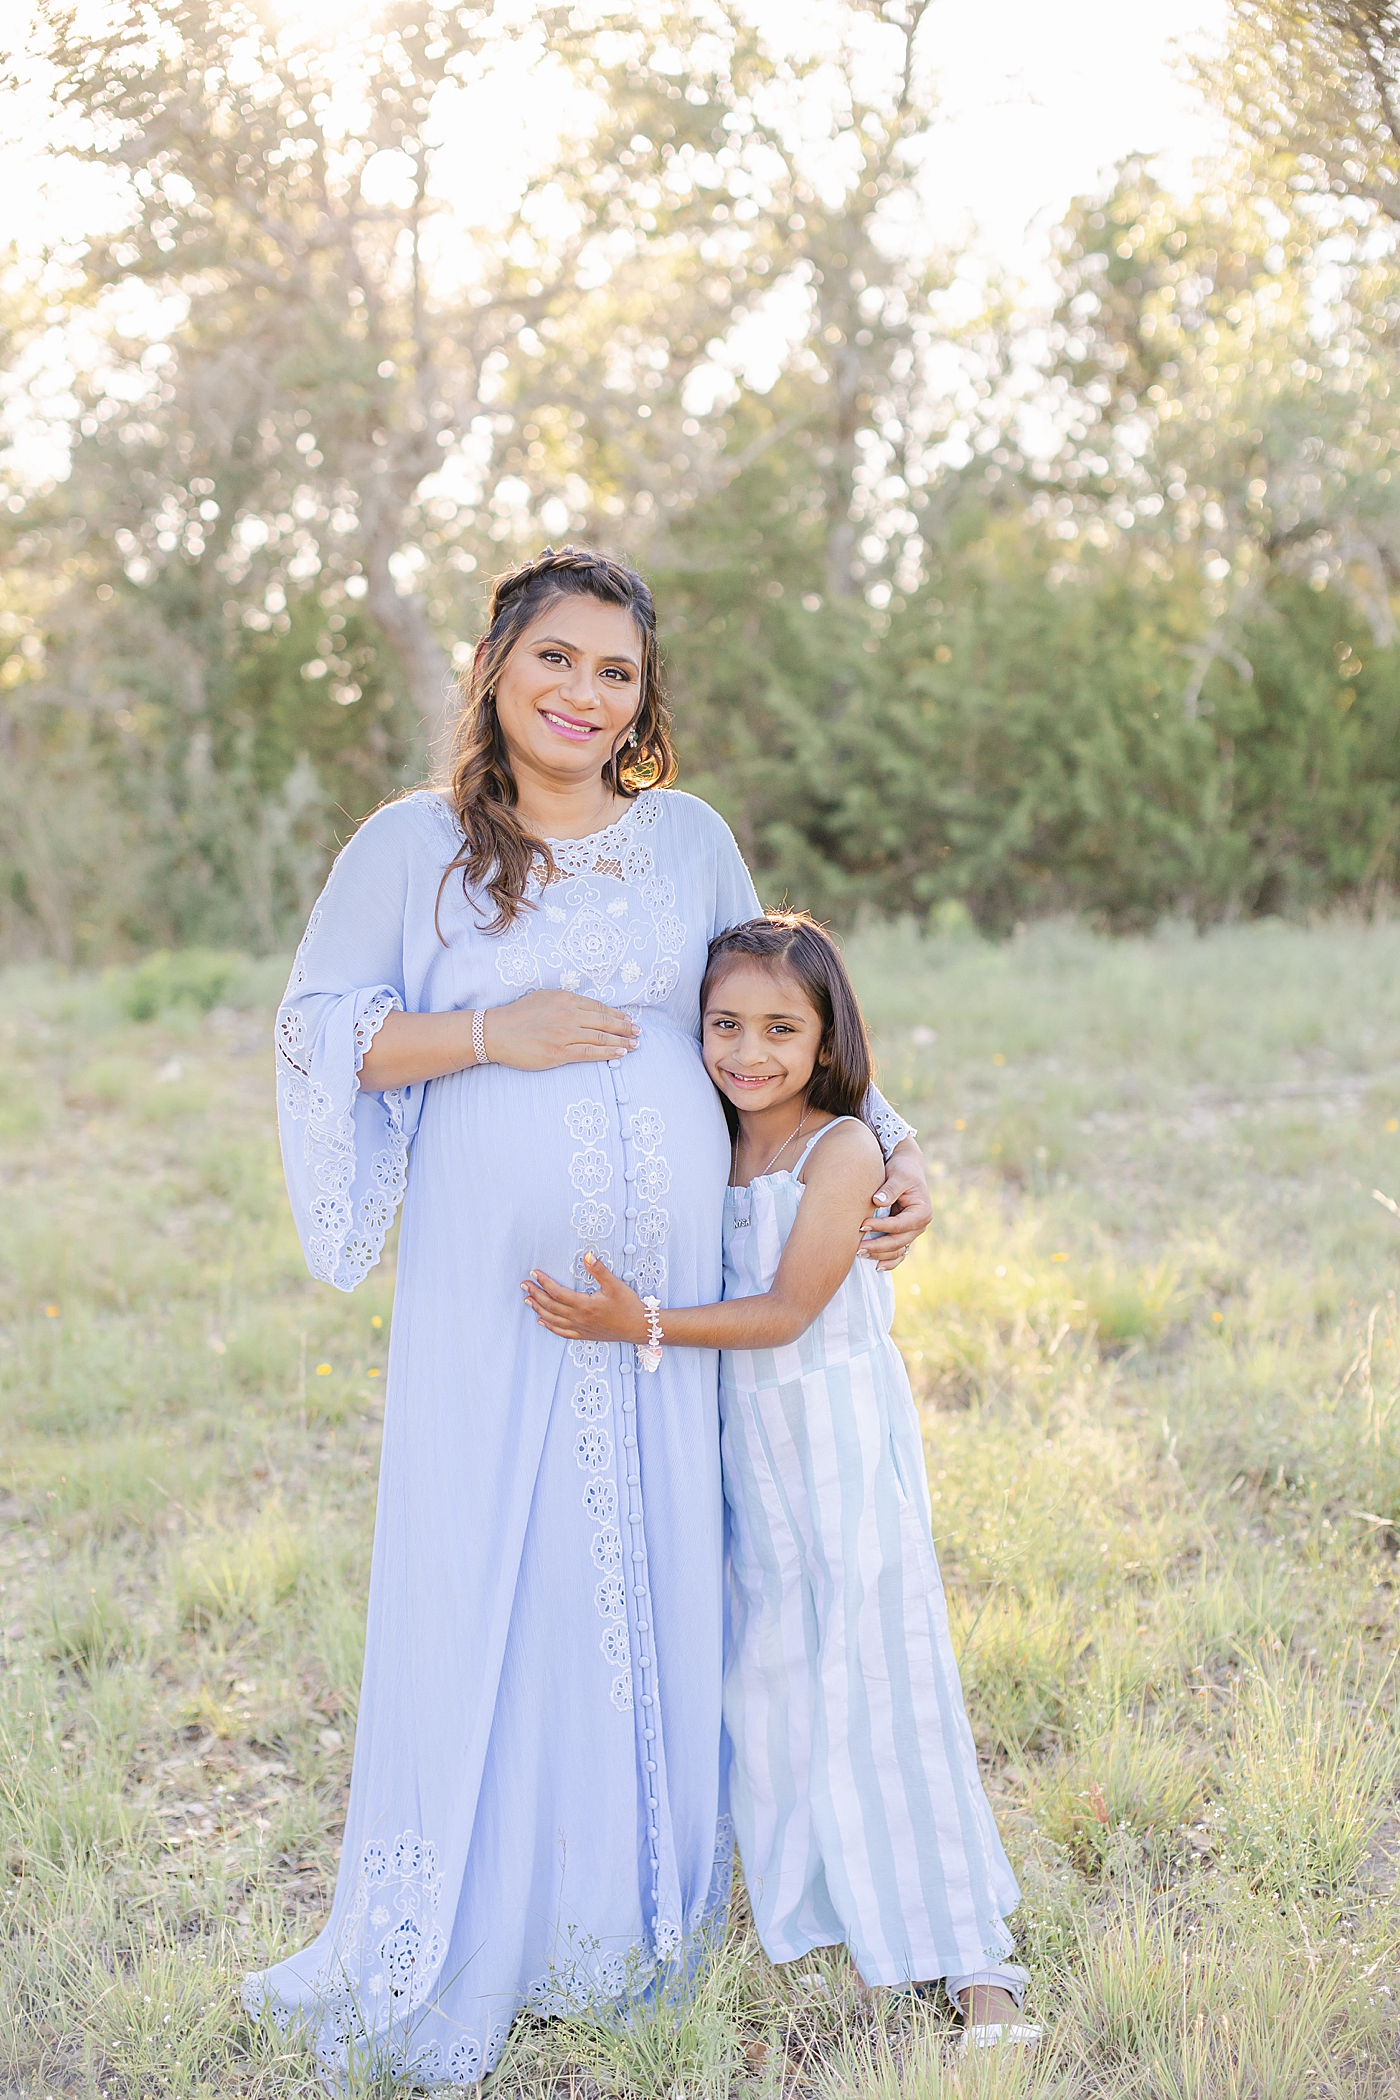 Mom and daughter hugging during their Outdoor Maternity Session in Austin | Photo by Sana Ahmed Photography